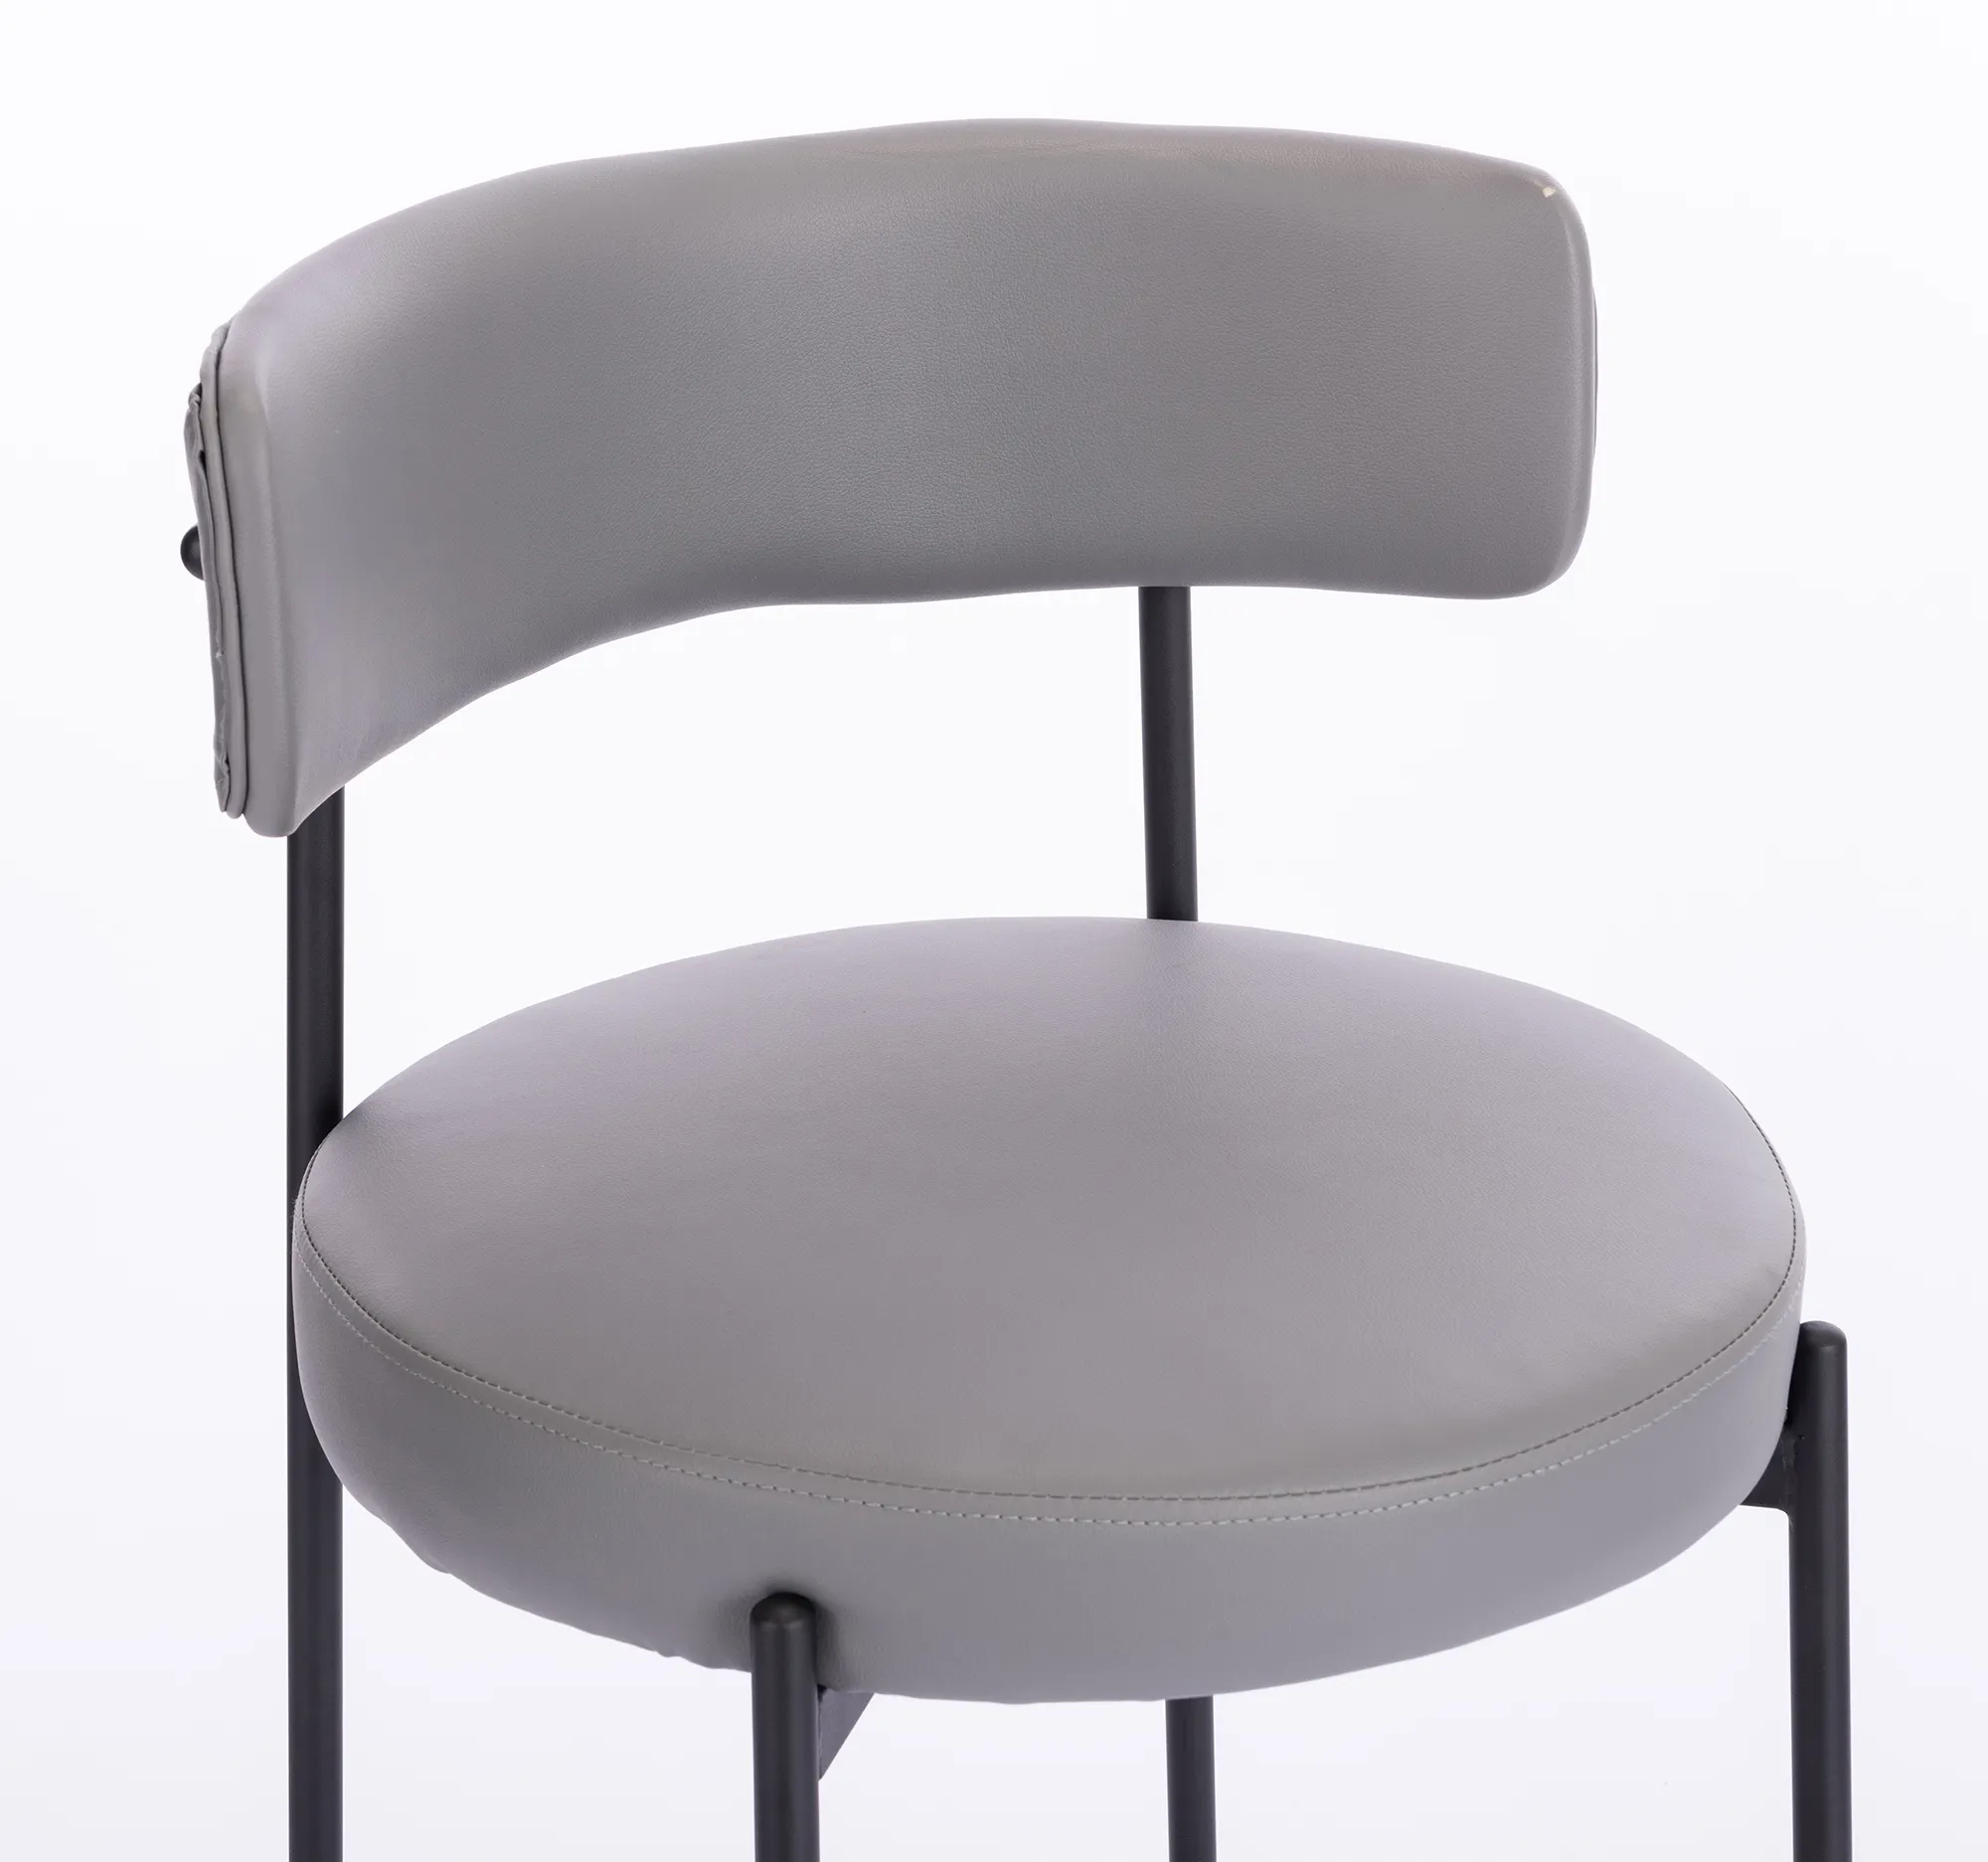 Modern Design Mid Back Leather Metal Frame Soft Leather Seat Cushion Kitchen Counter Bar Stool